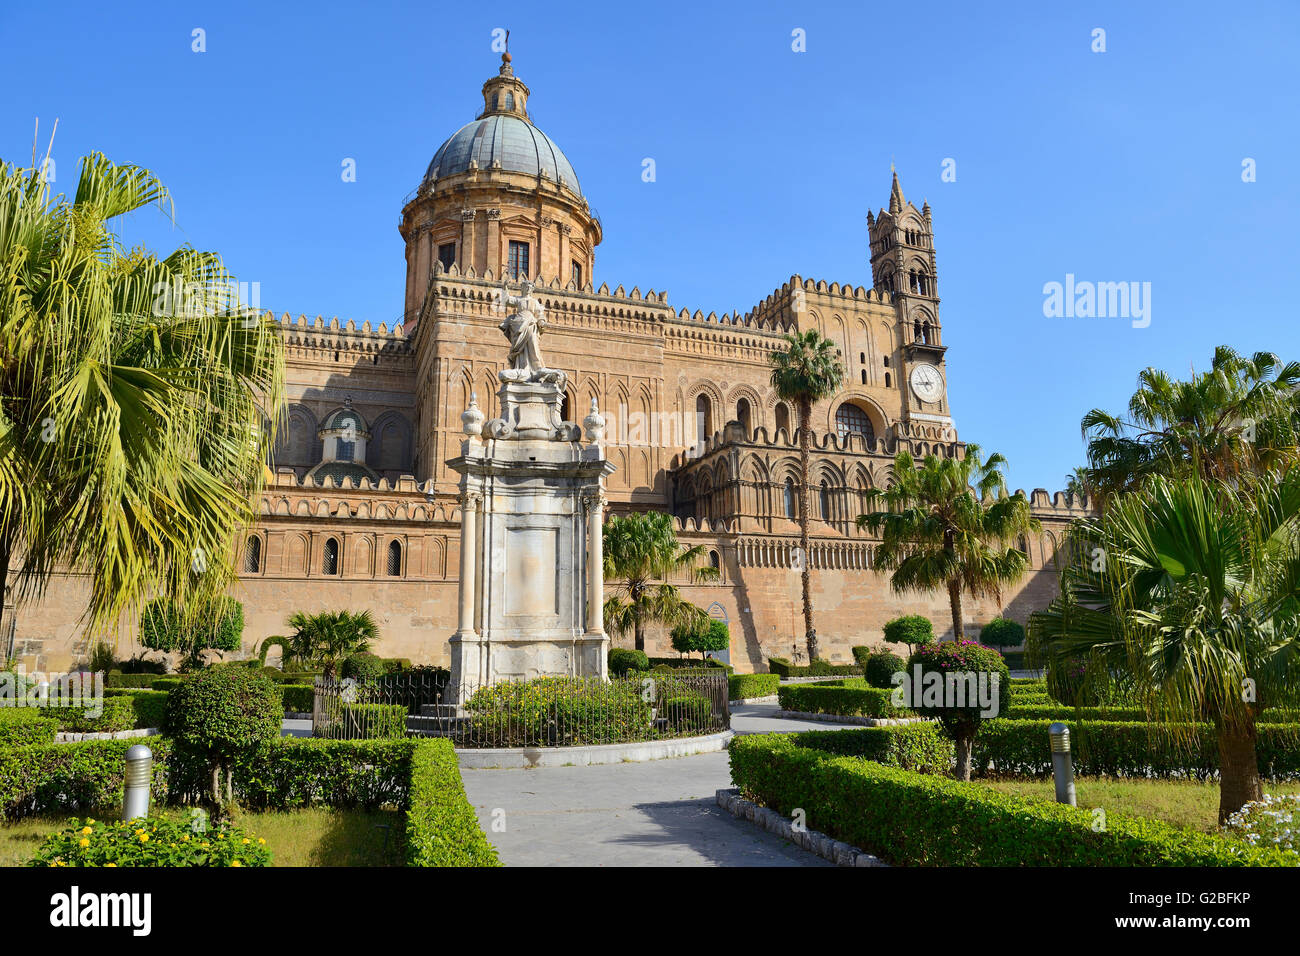 Palermo Cathedral (Our Lady of the Assumption) in Piazza Sett'angeli, Palermo, Sicily, Italy Stock Photo